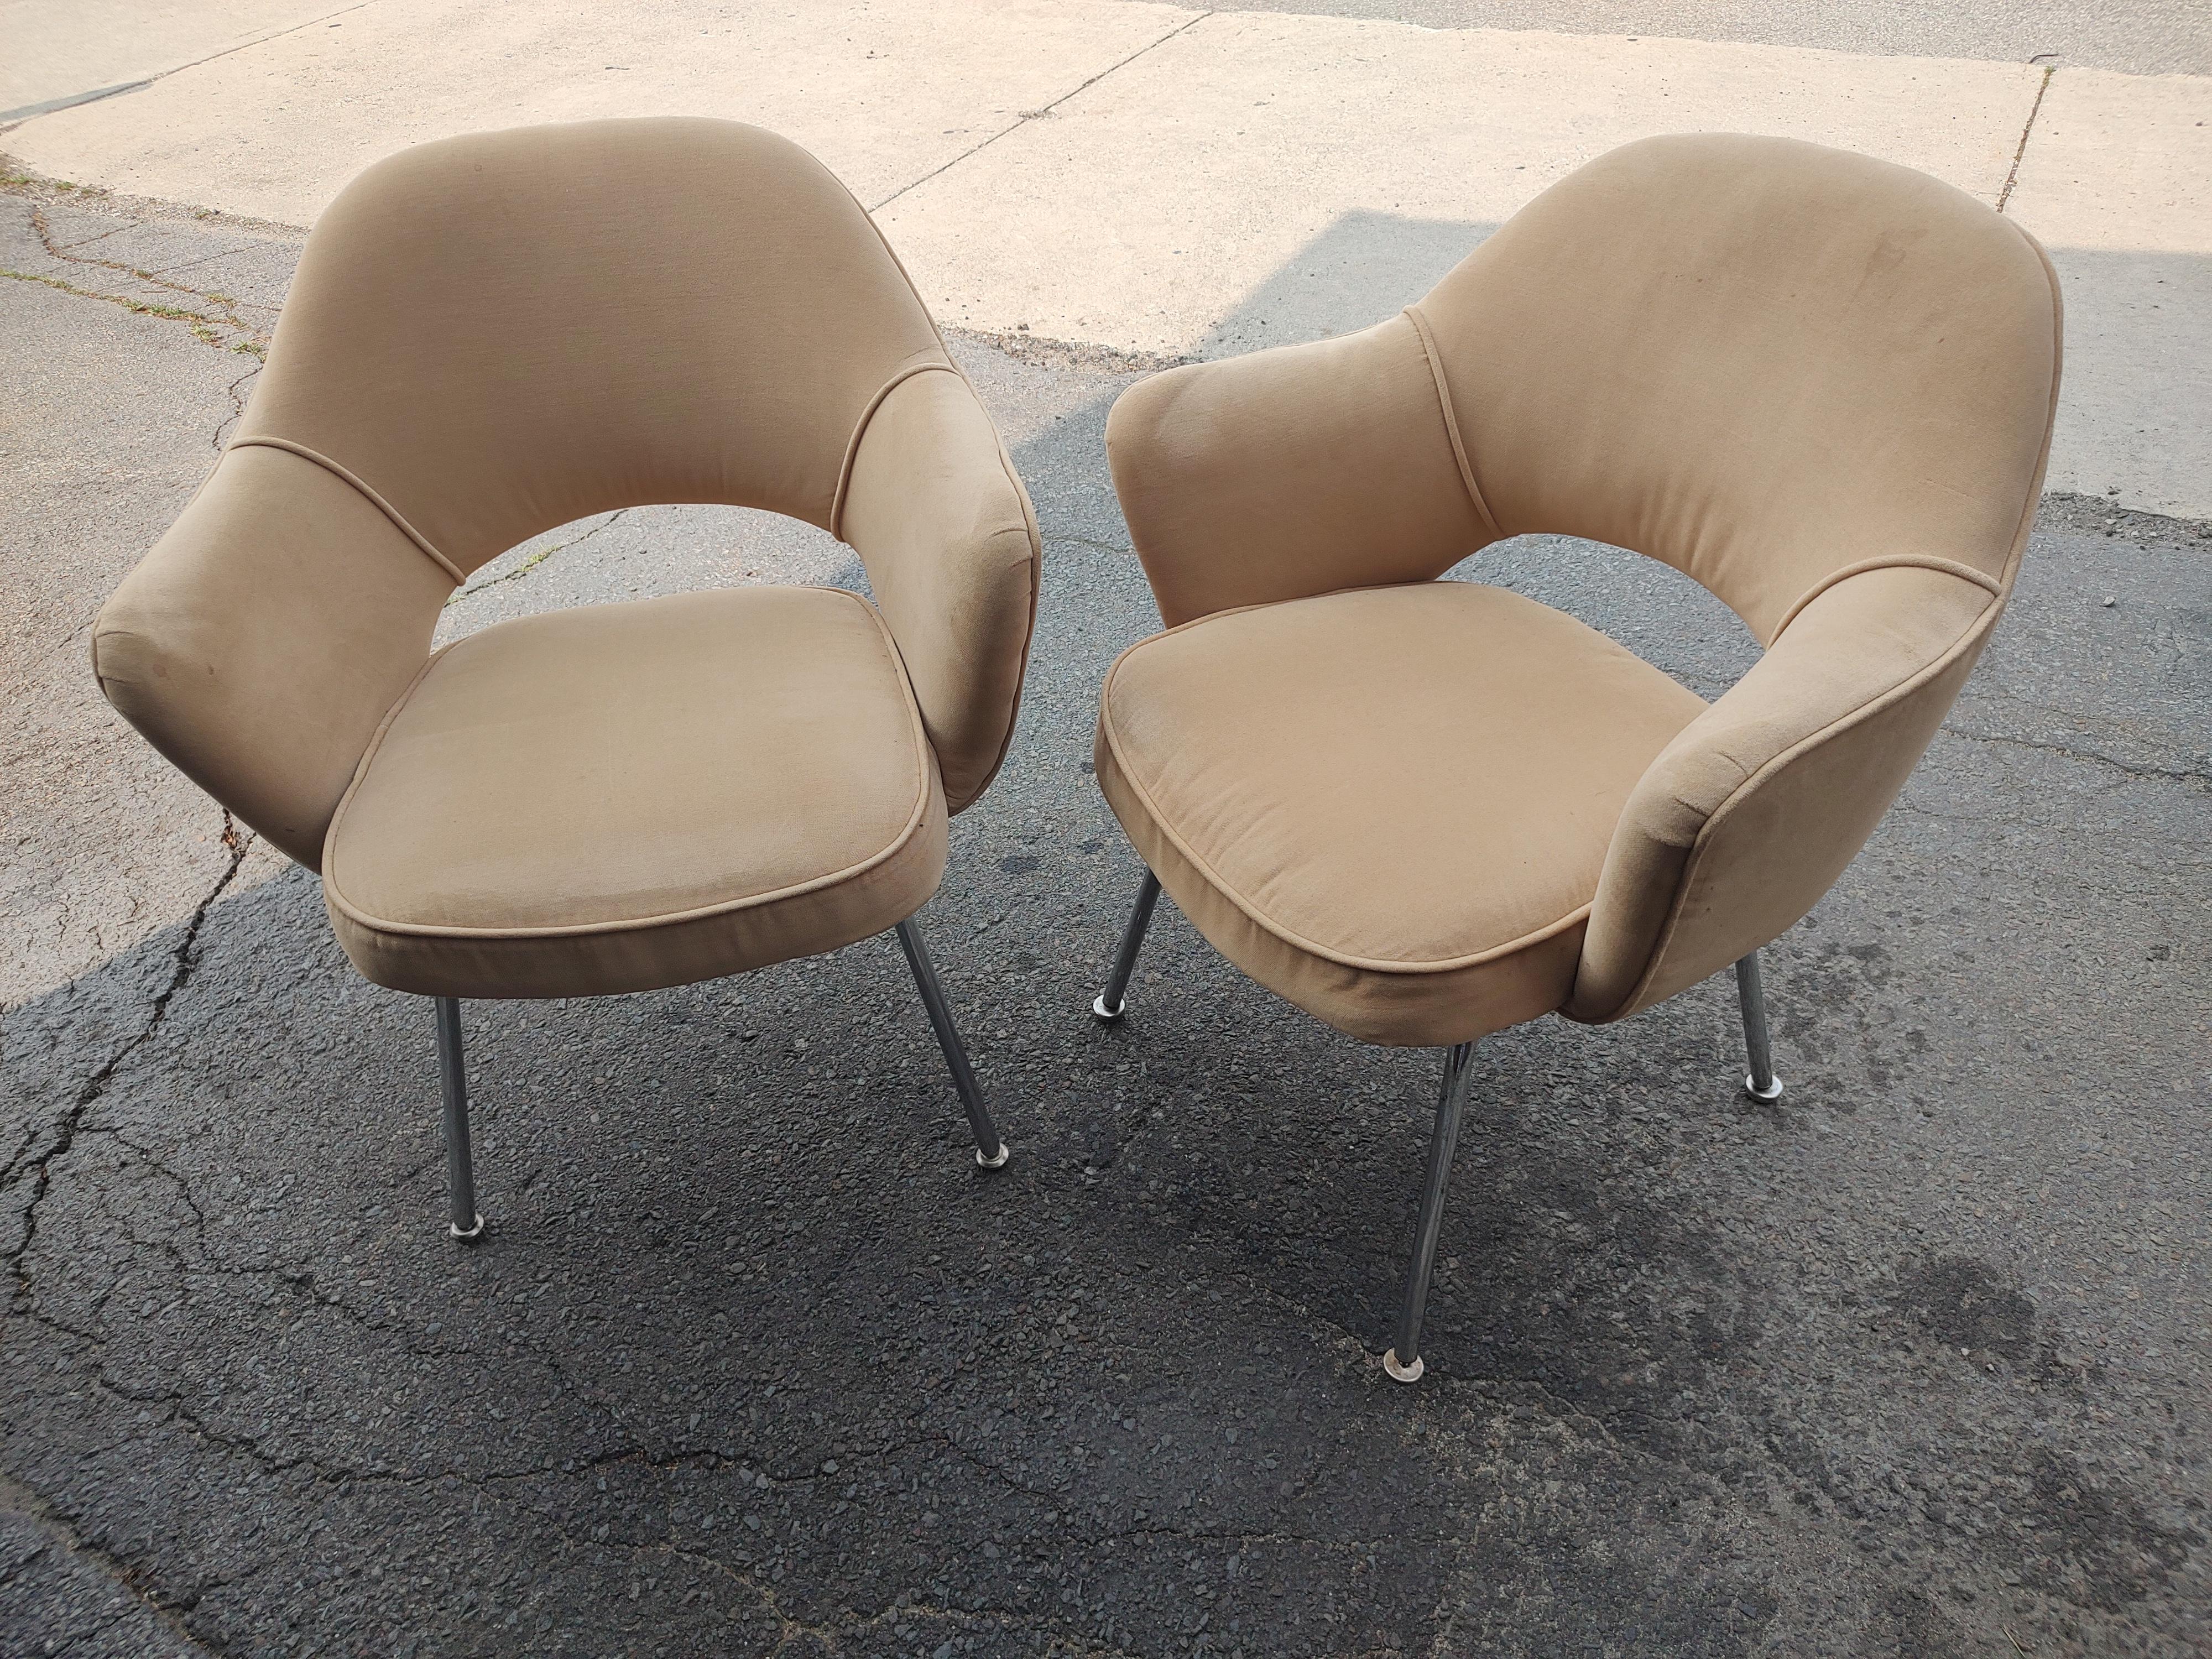 Pair of Mid-Century Modern Executive Armchairs by Eero Saarinen for Knoll, C1965 For Sale 6